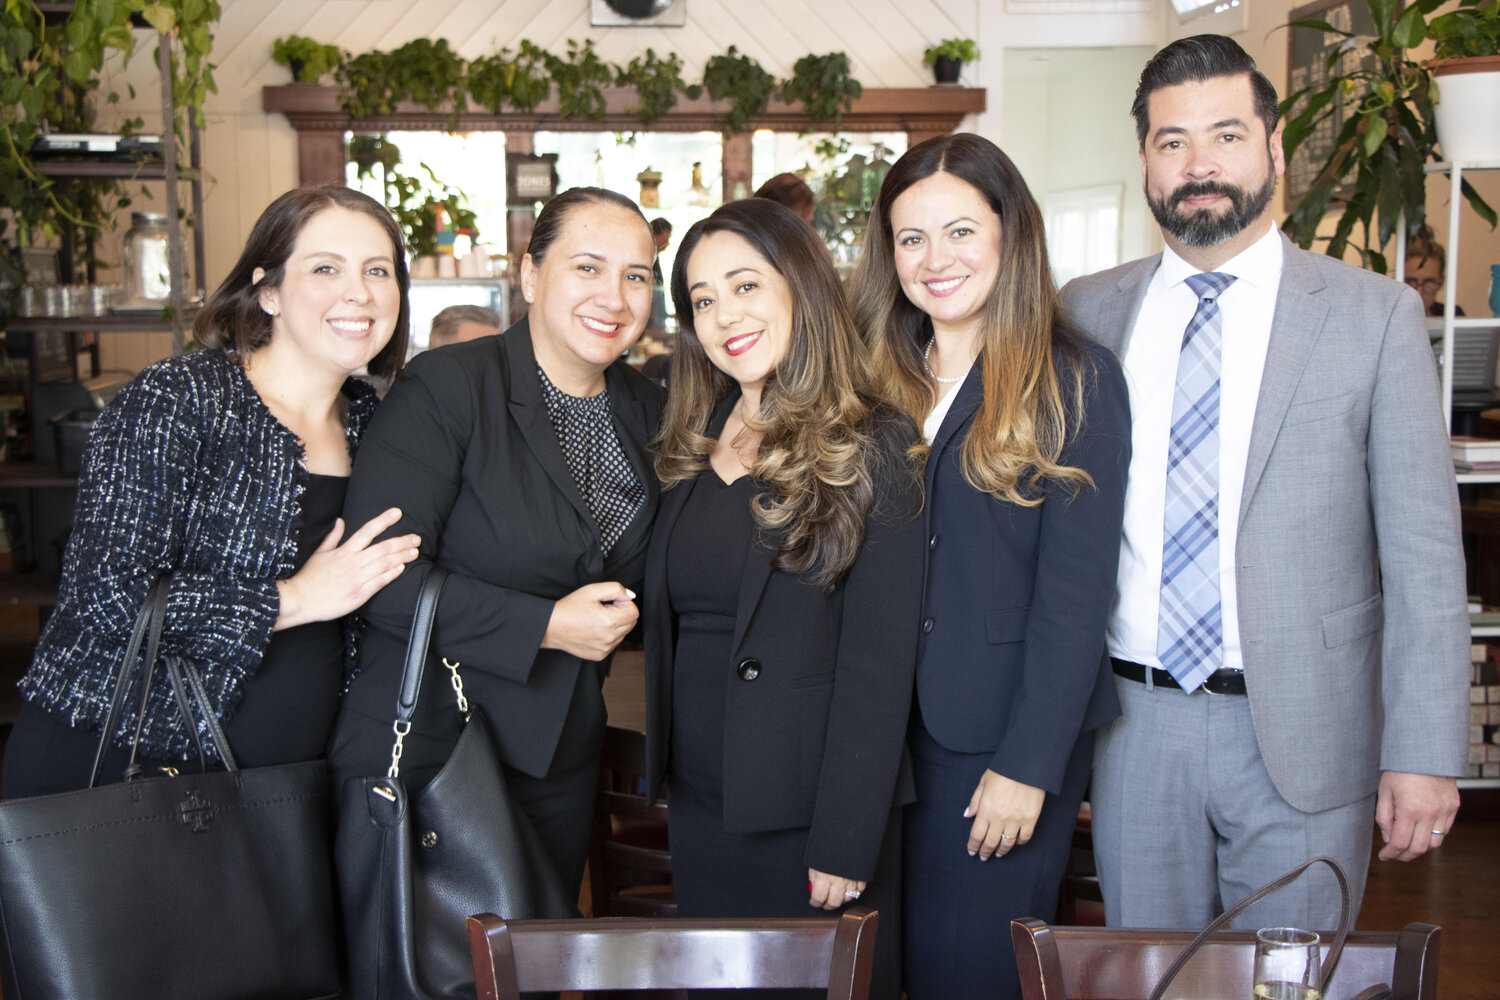 Immigration attorneys from the documentary "Status Pending". Photo taken from Immigration Resource Center of San Gabriel Valley (IRCSGV).